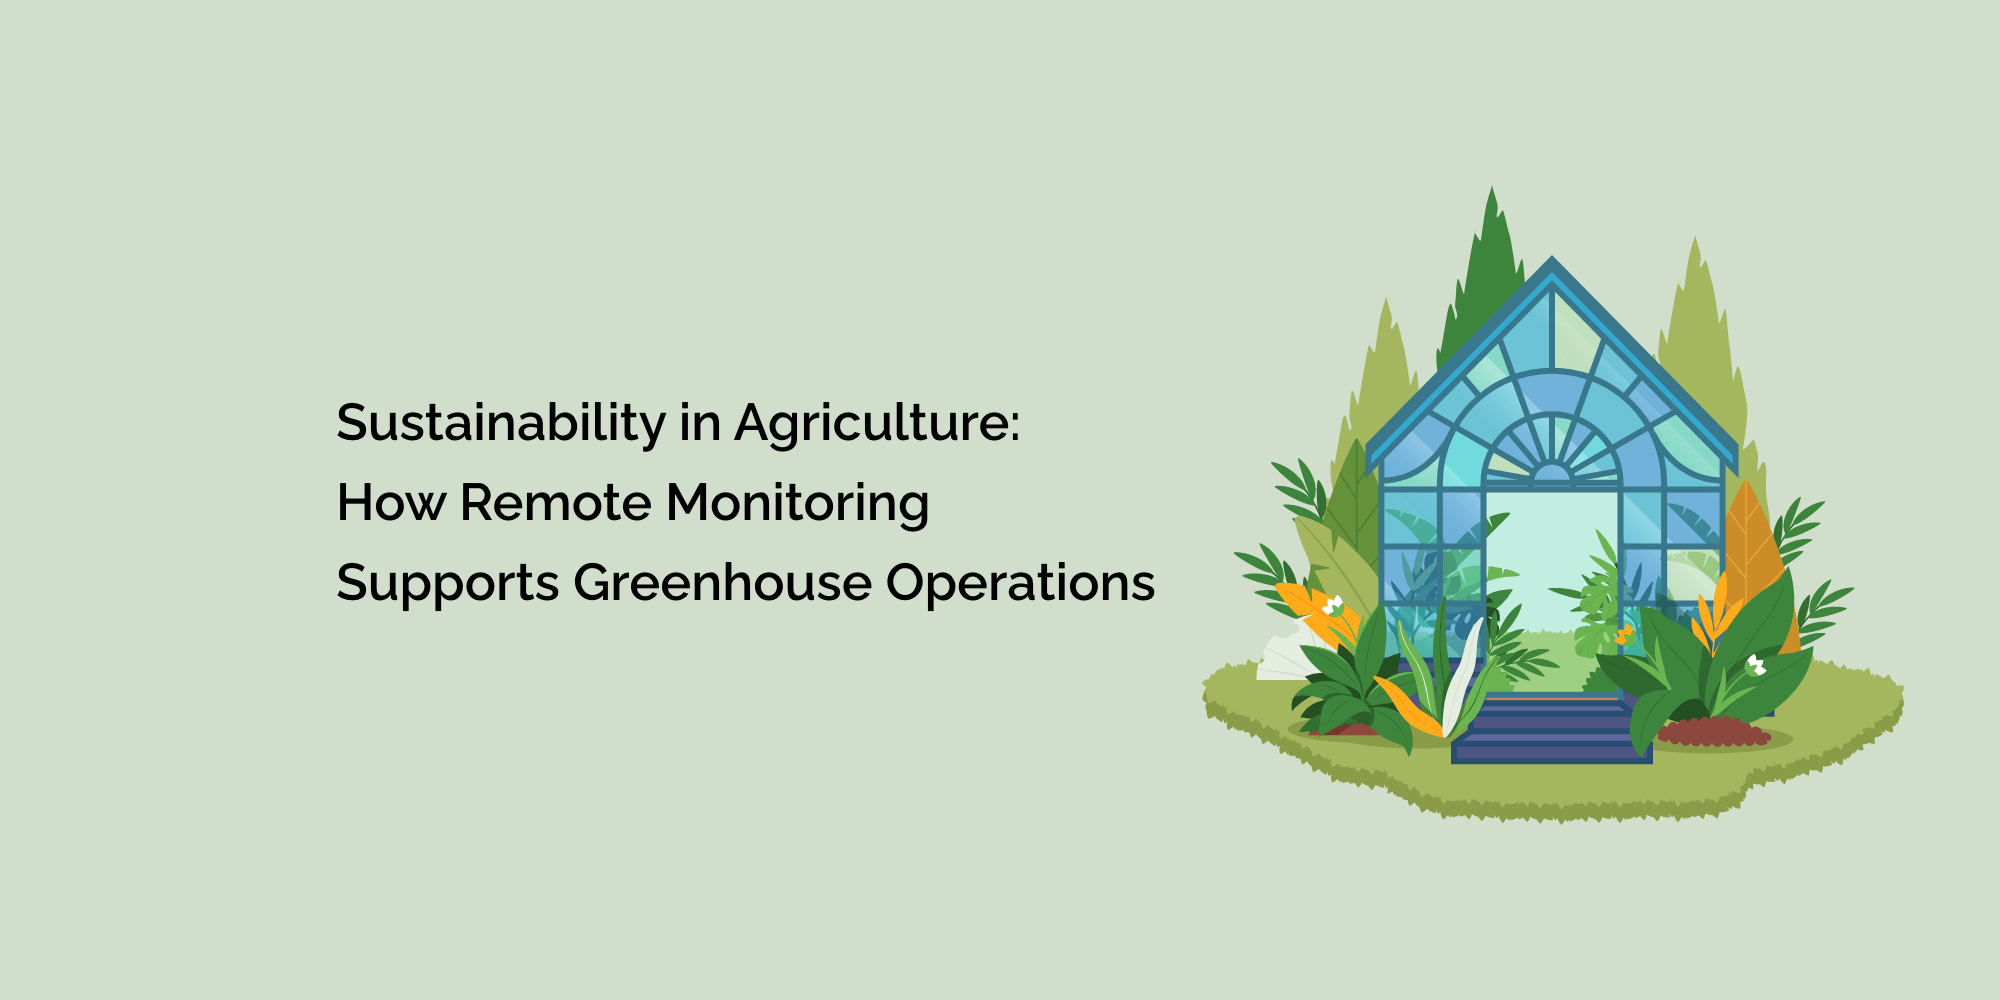 Sustainability in Agriculture: How Remote Monitoring Supports Greenhouse Operations